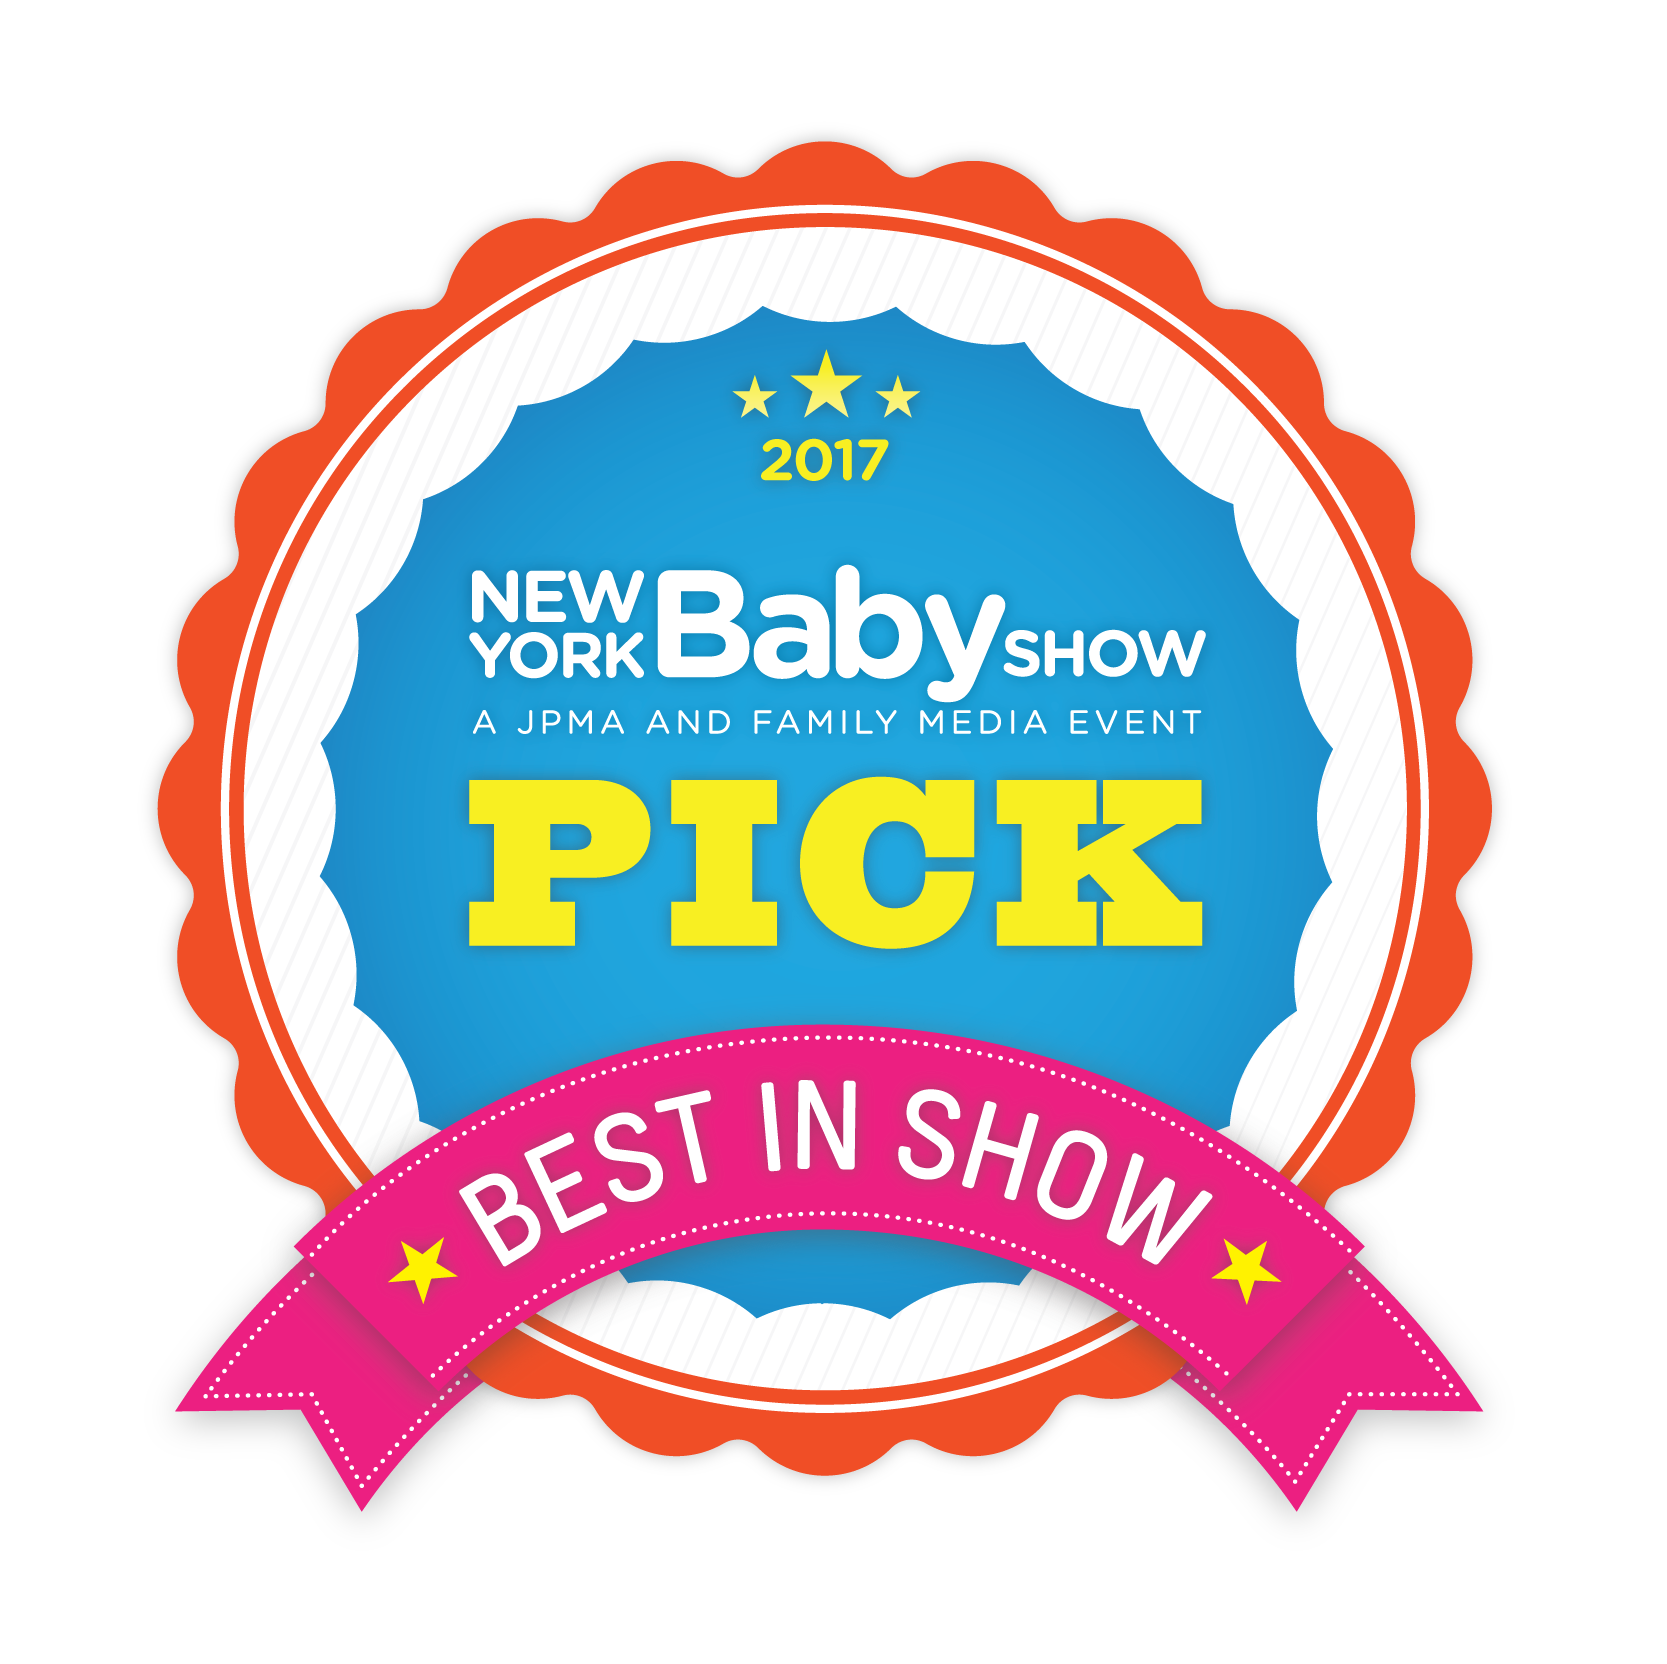 NYBS_Picks_Best in Show 2017 (2)